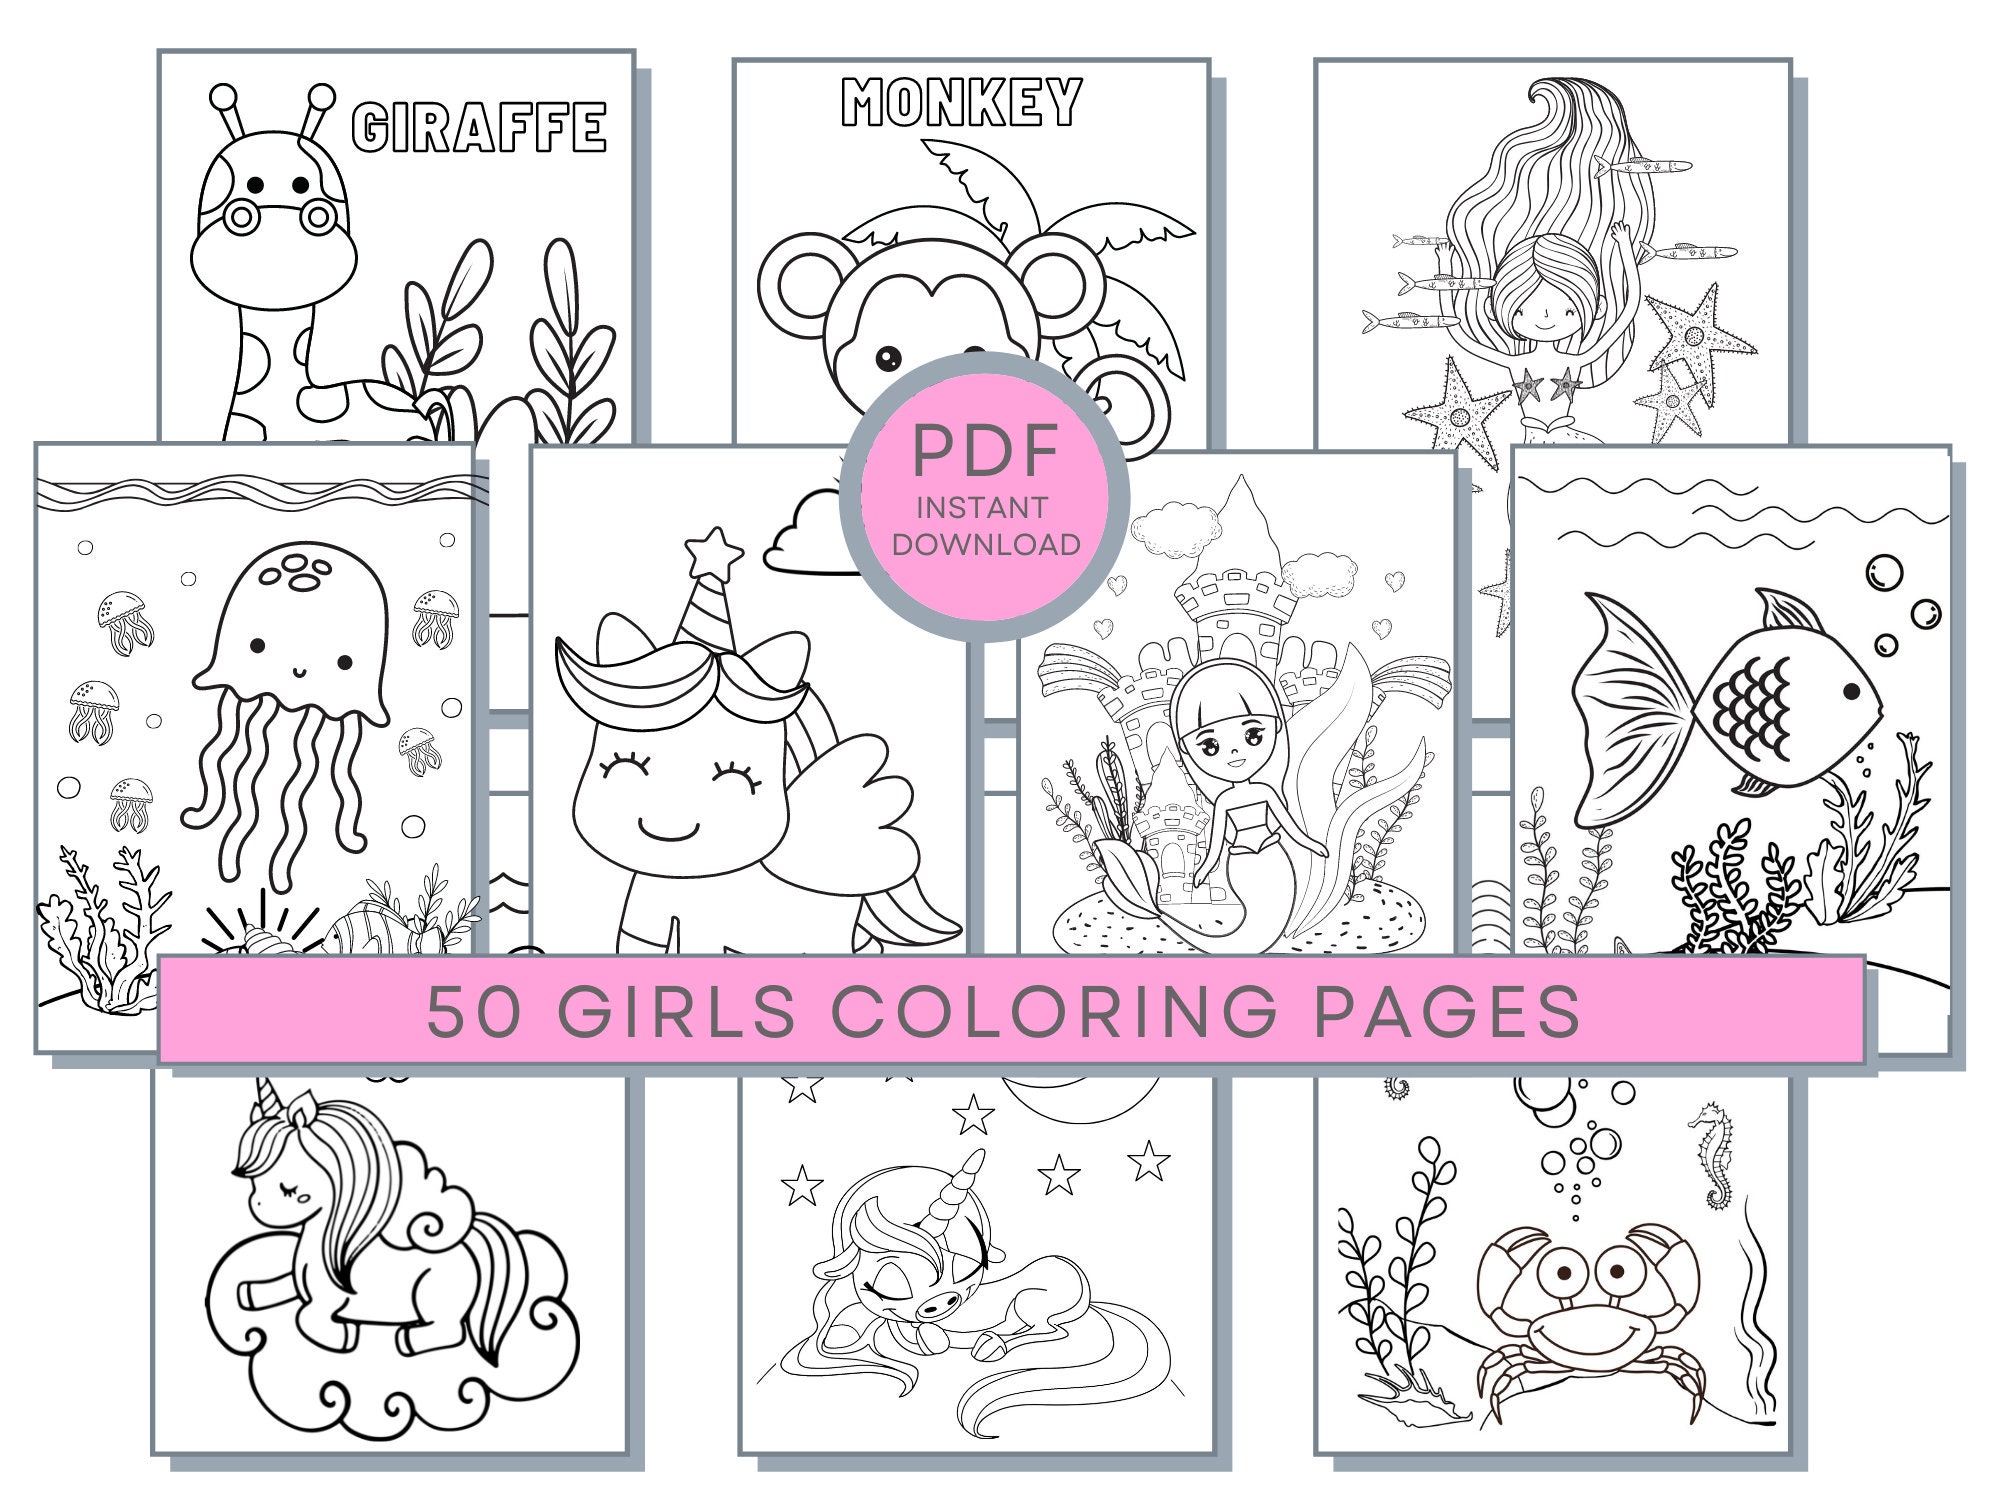 Coloring pages for girls  chelseachacktanmegi1982's Ownd